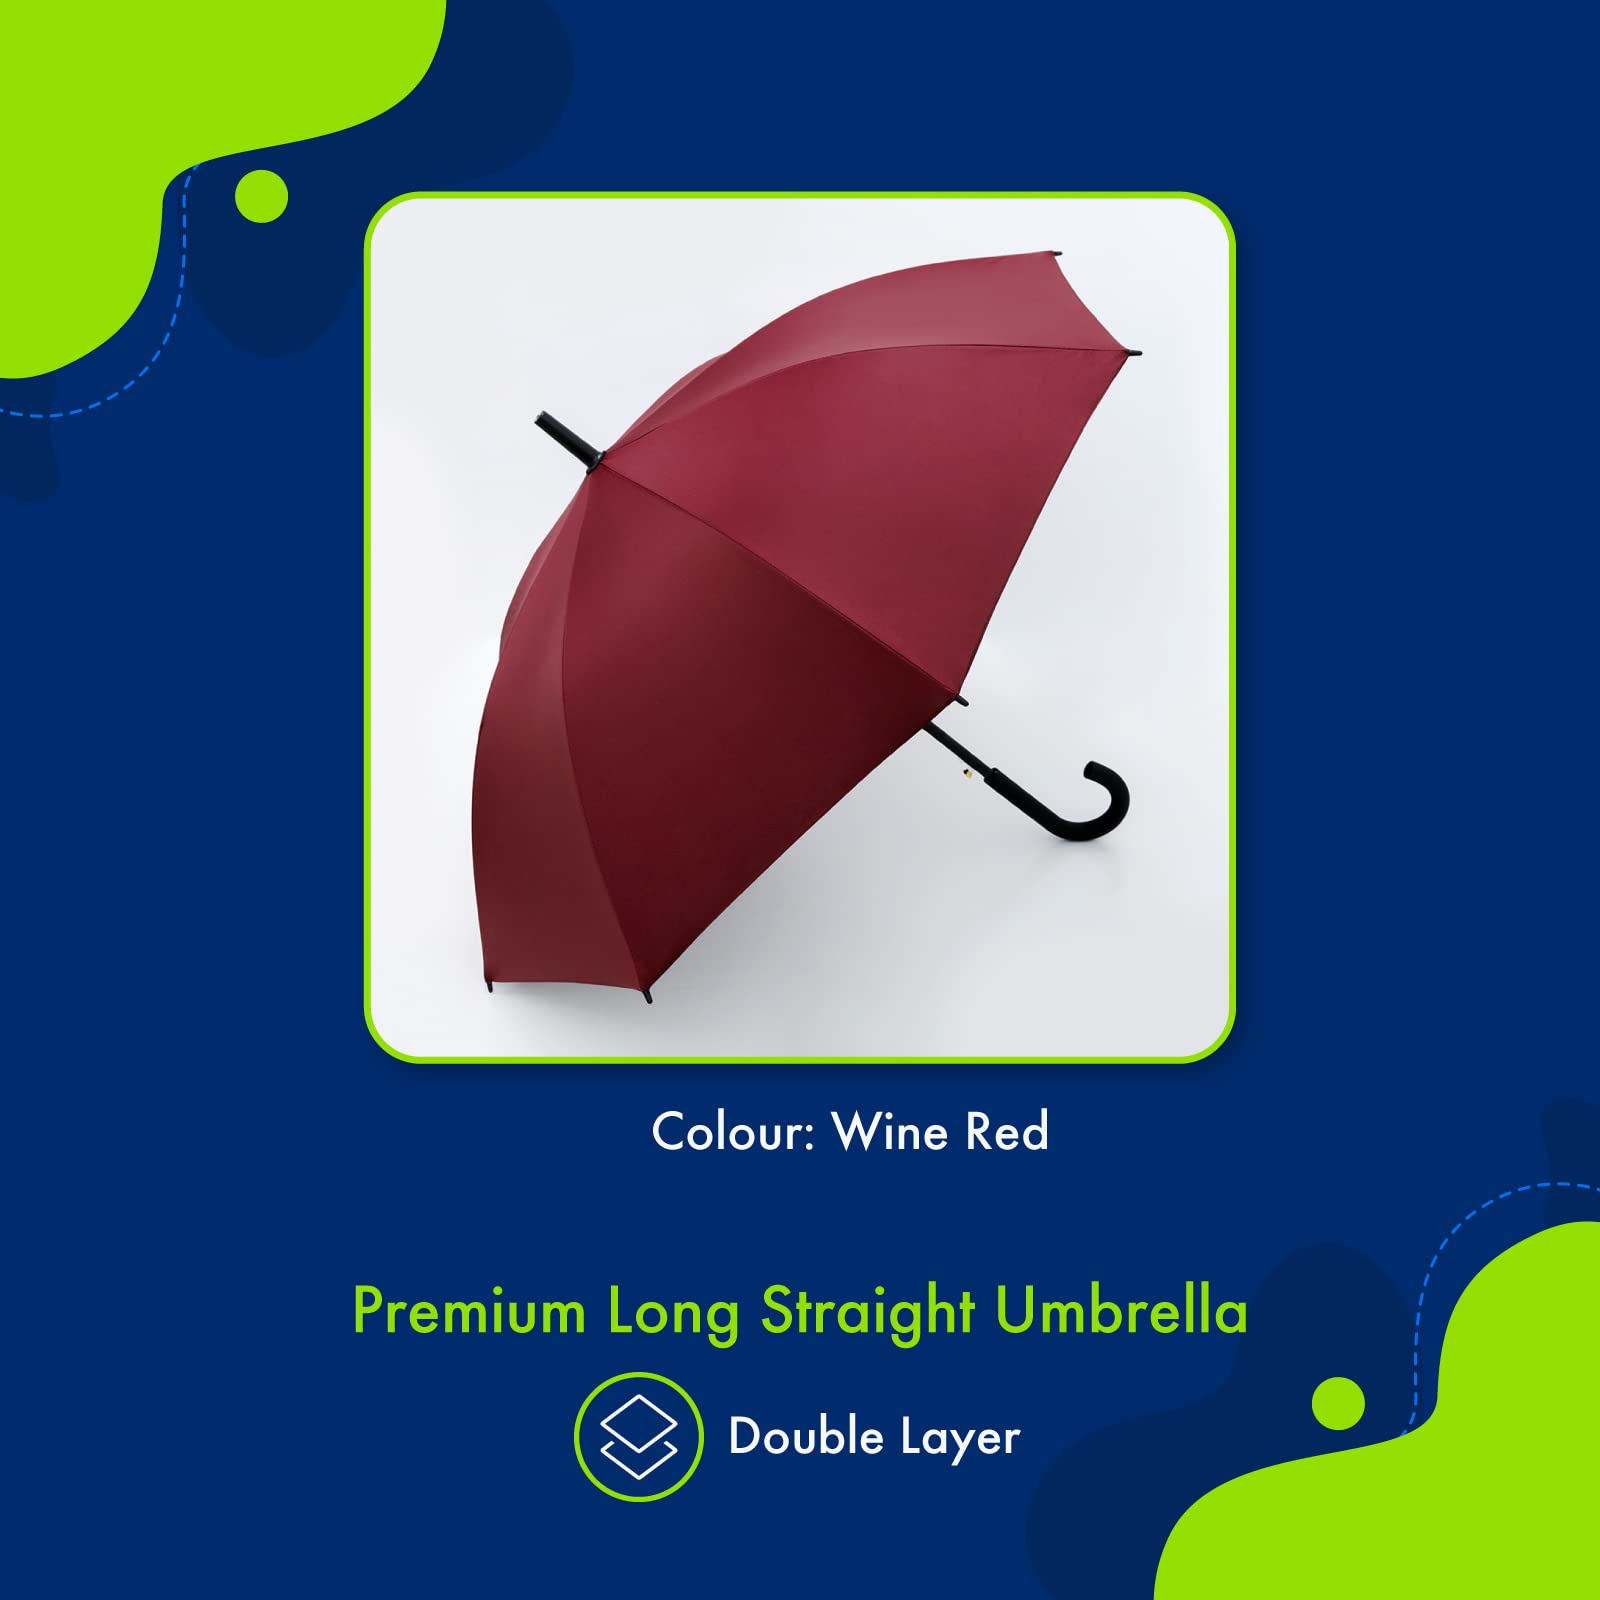 ABSORBIA Big Straight and Stick Umbrella for rain, Windproof, Waterproof and UV Coated, Open Diameter 105cm Double Layer Umbrella in Red Colour